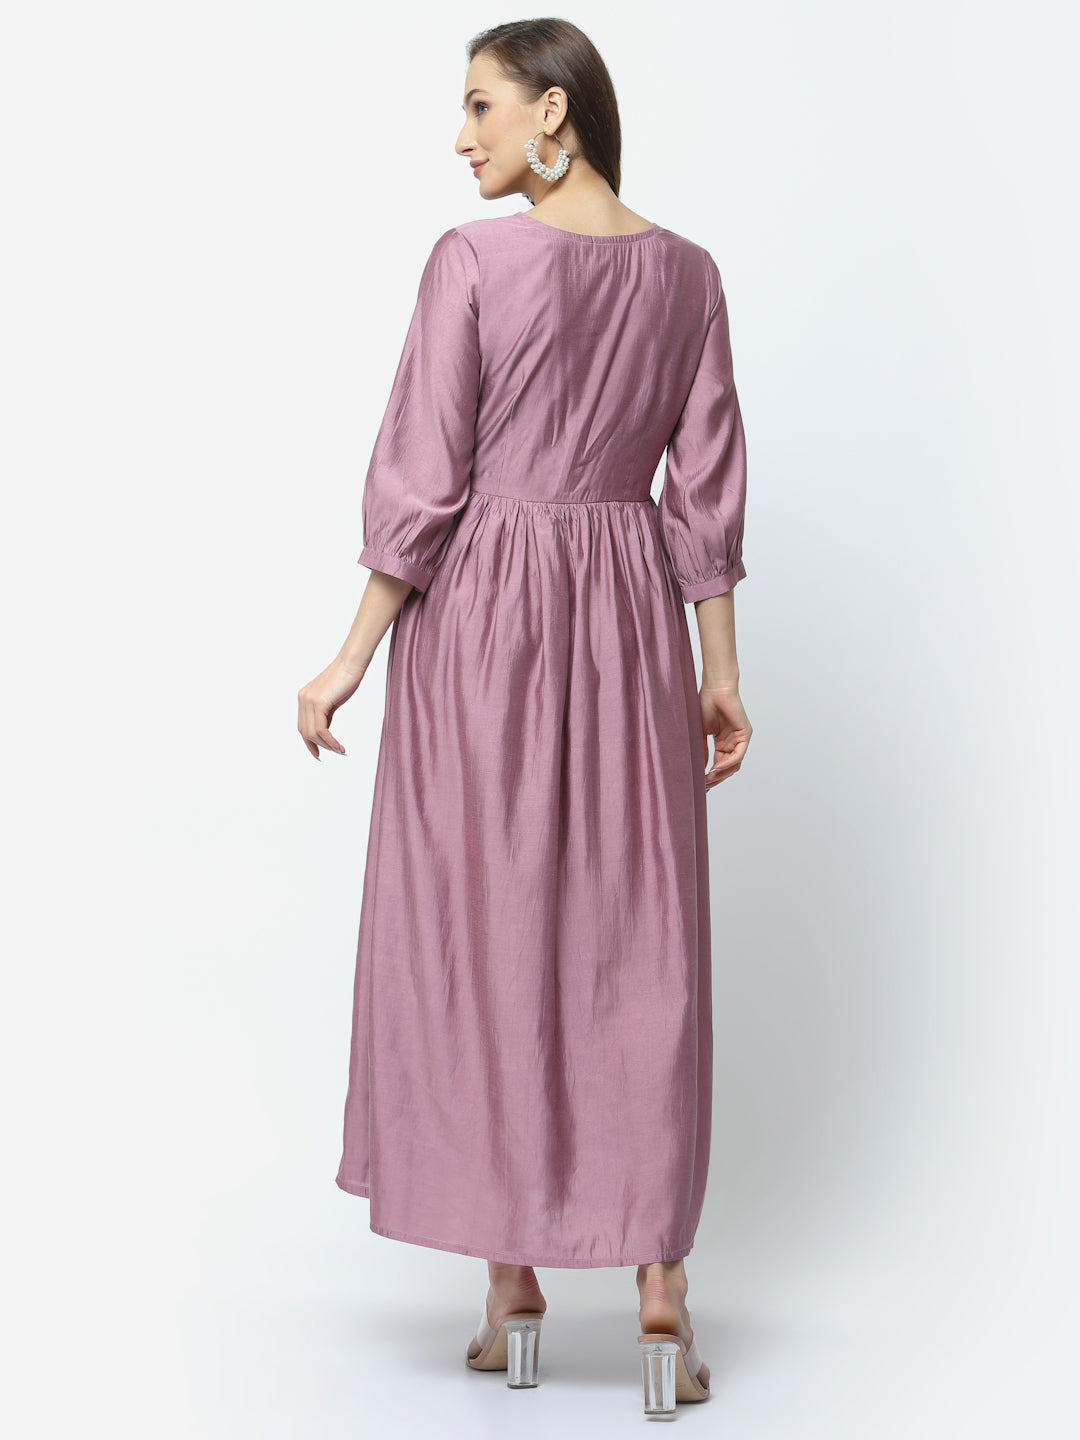 Light Mauve Maxi Flared Dress with Neck Embroidery Detailing - ARH1476